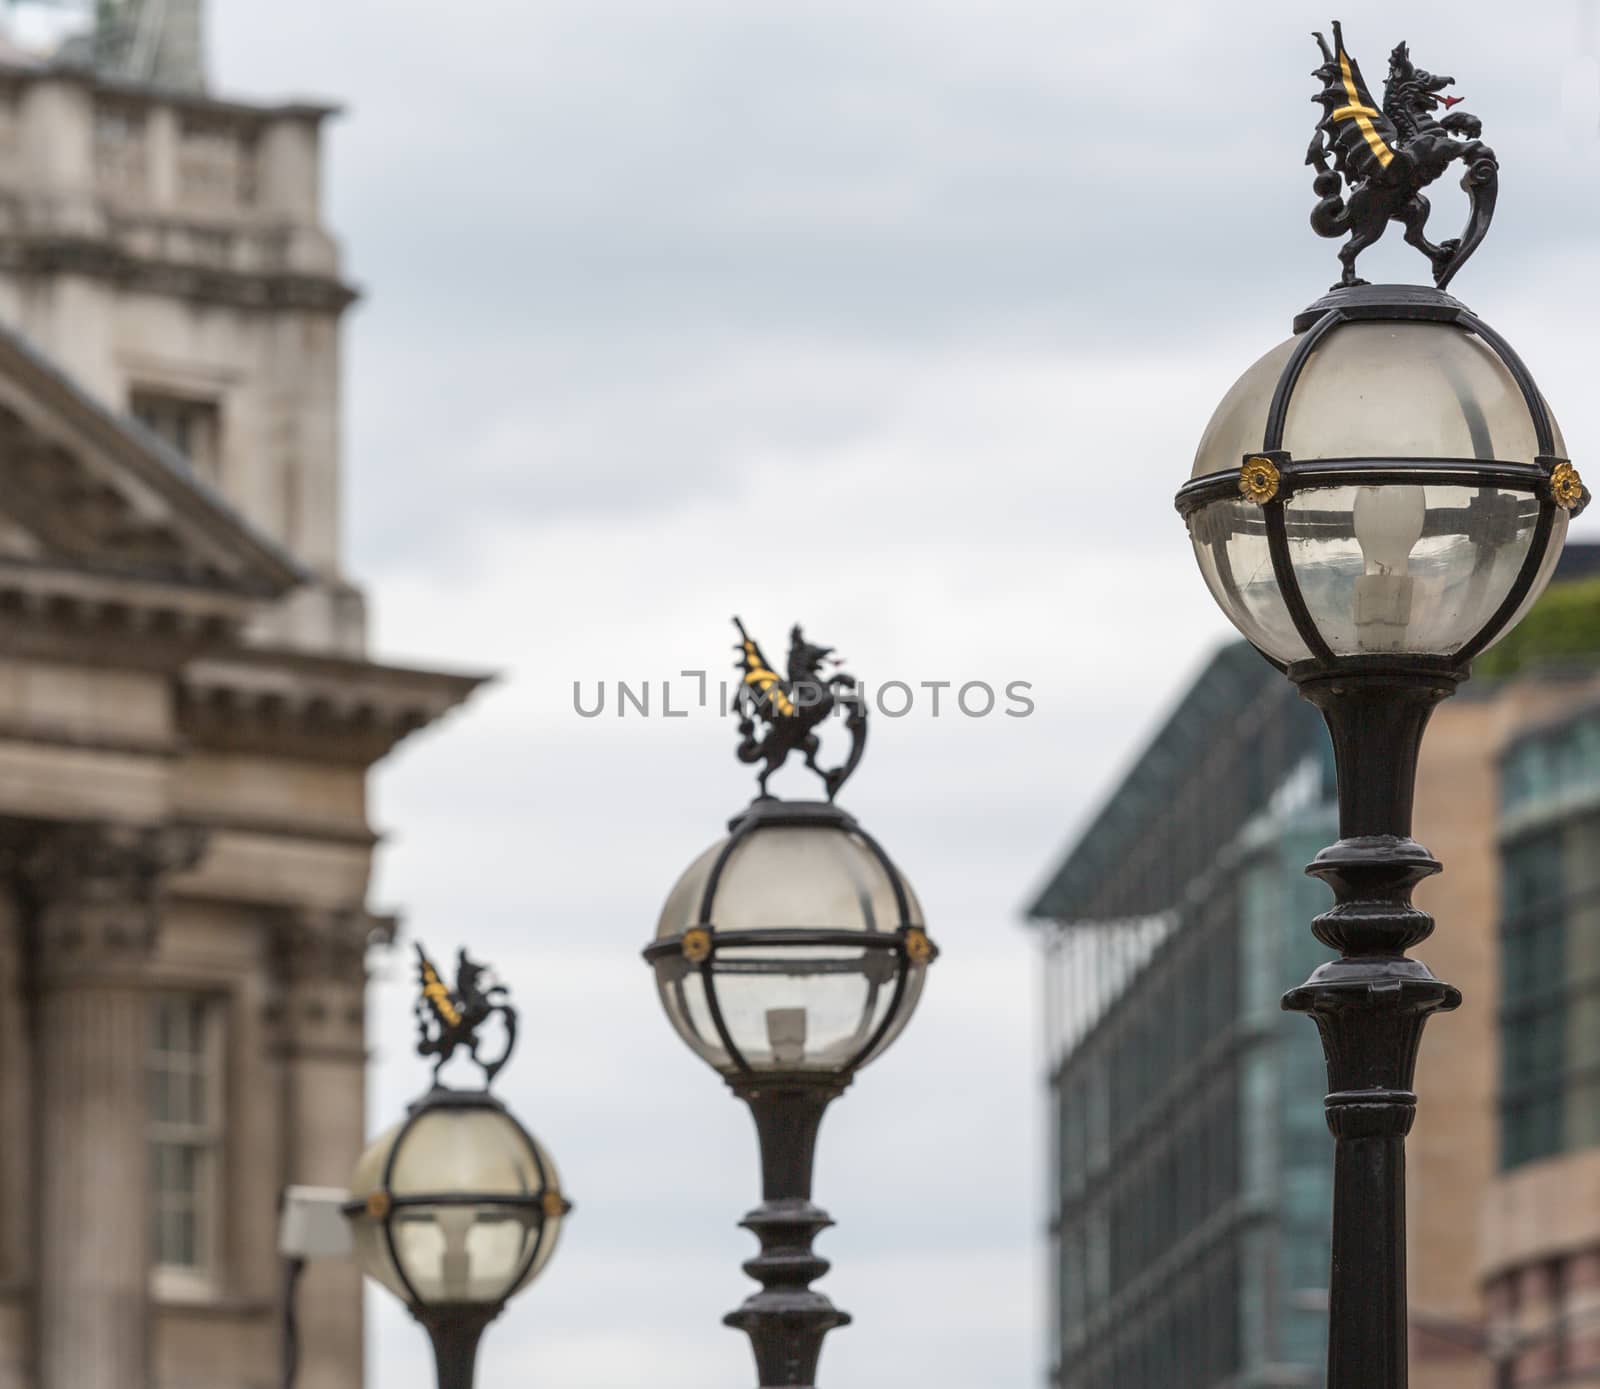 Three in a series of The old City of London Street Lights near t by chrisukphoto